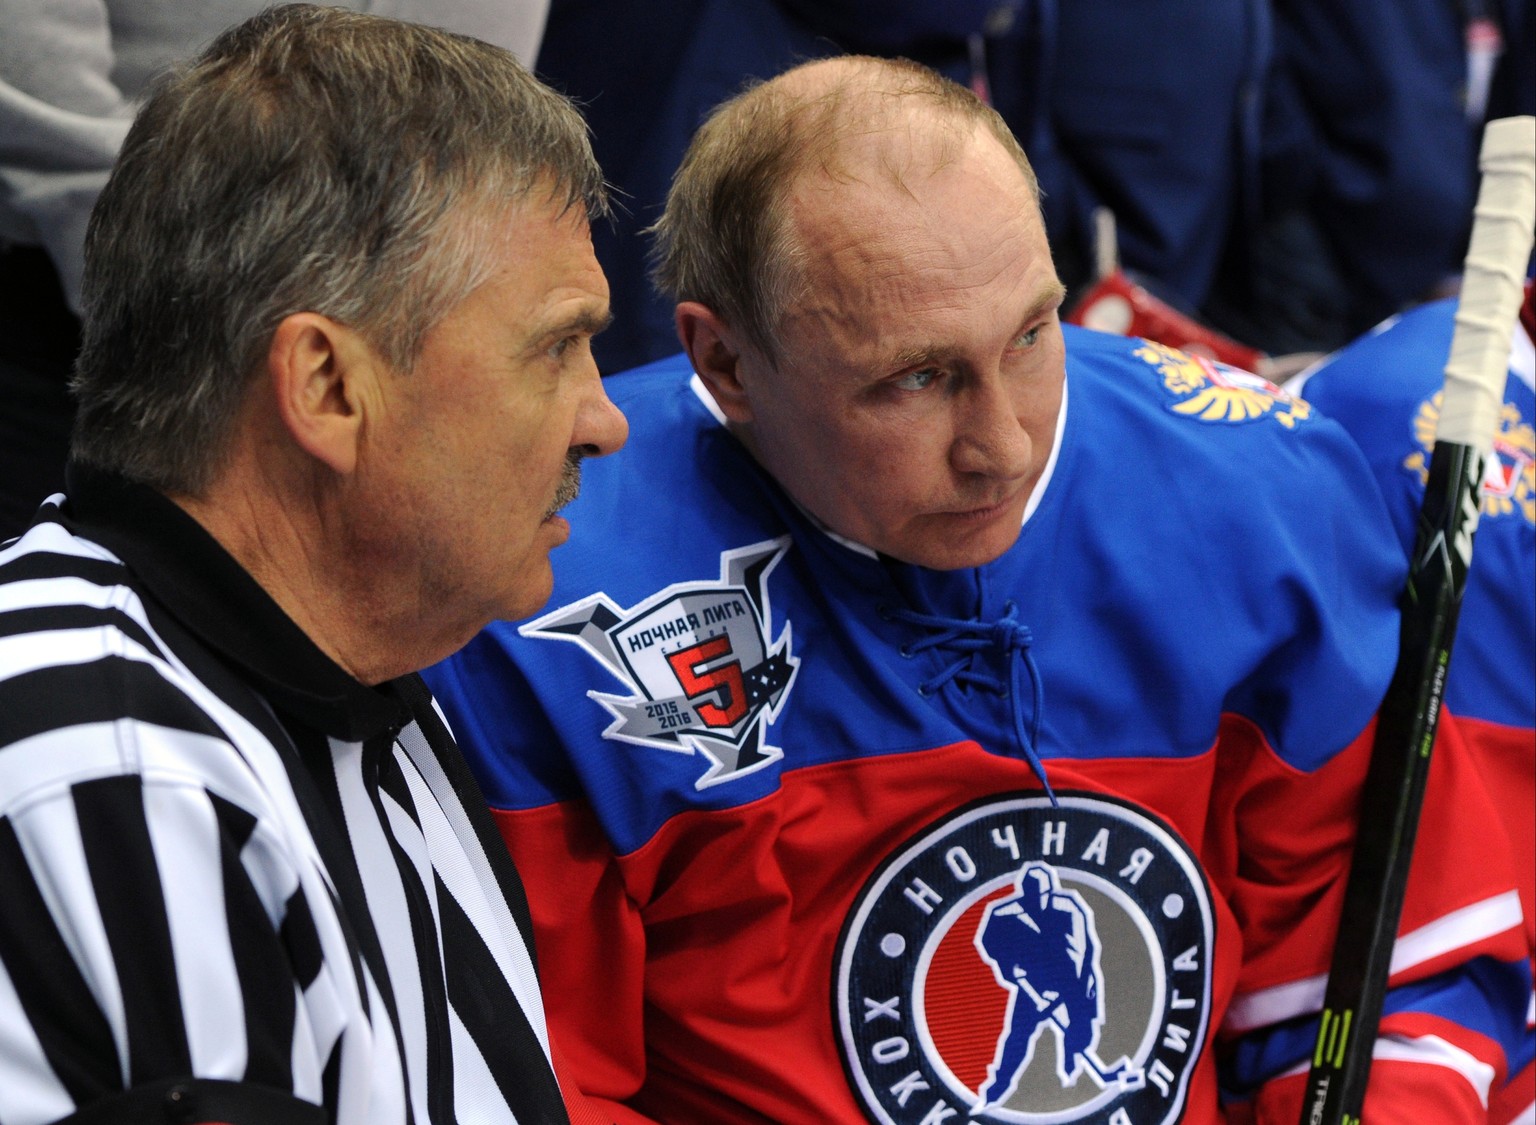 Russian President Vladimir Putin, right, speaks with IIHF President Rene Fasel as he takes part in a gala match of the Night Hockey League in the Bolshoy Ice Dome in the Black Sea resort of Sochi, Rus ...